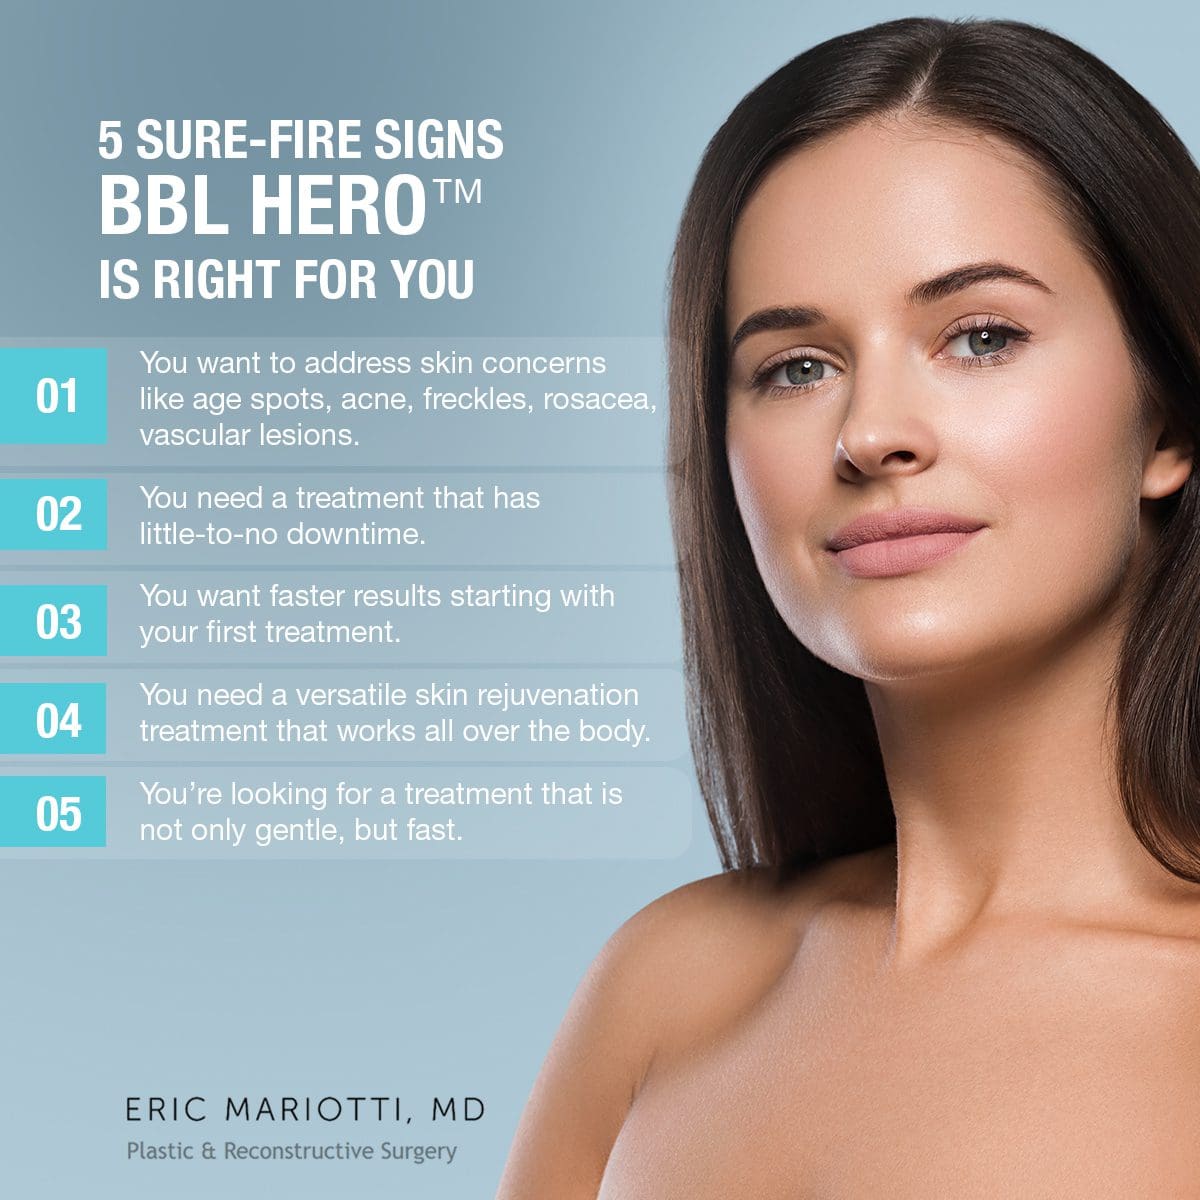 5 Sure-Fire Signs BBL HERO™ Is Right for You